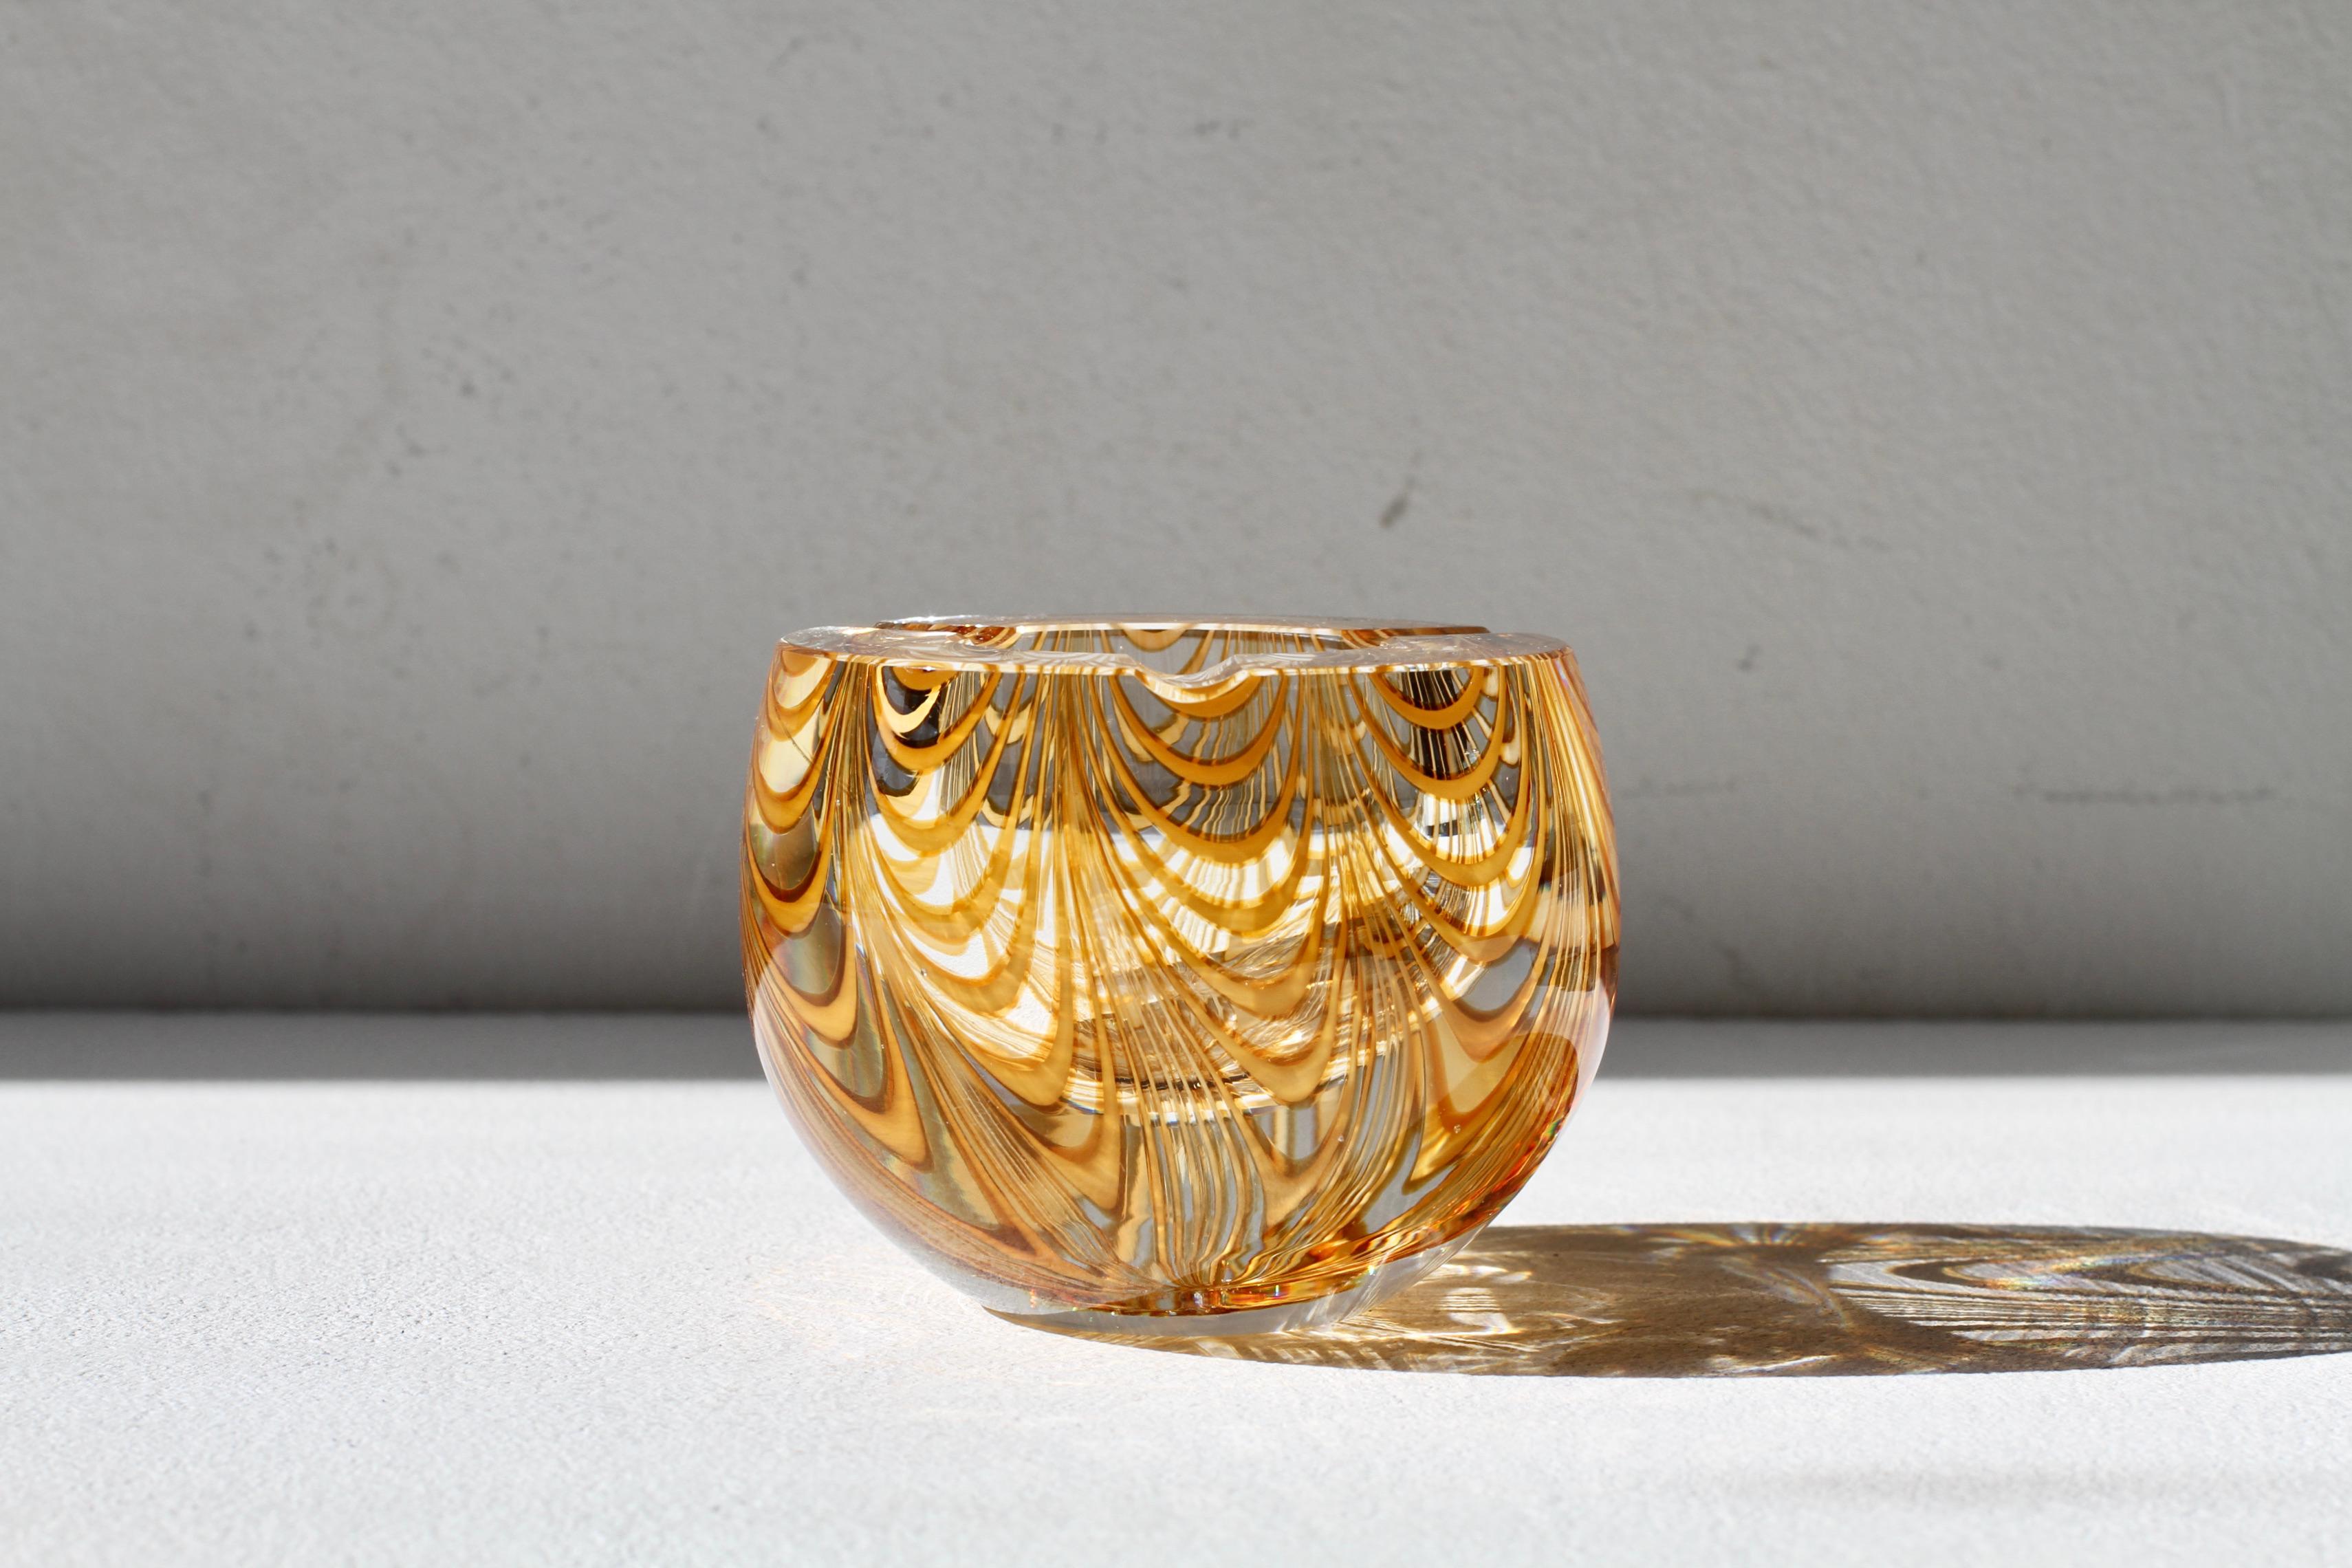 Antonio da Ros (attributed) for Cenedese thick and heavy vintage Mid-Century Modern Italian Murano glass ashtray, circa 1965-1975. This heavy piece of glass features an asymmetric design of amber toned glass curved 'Zebrato' stripes encased in clear